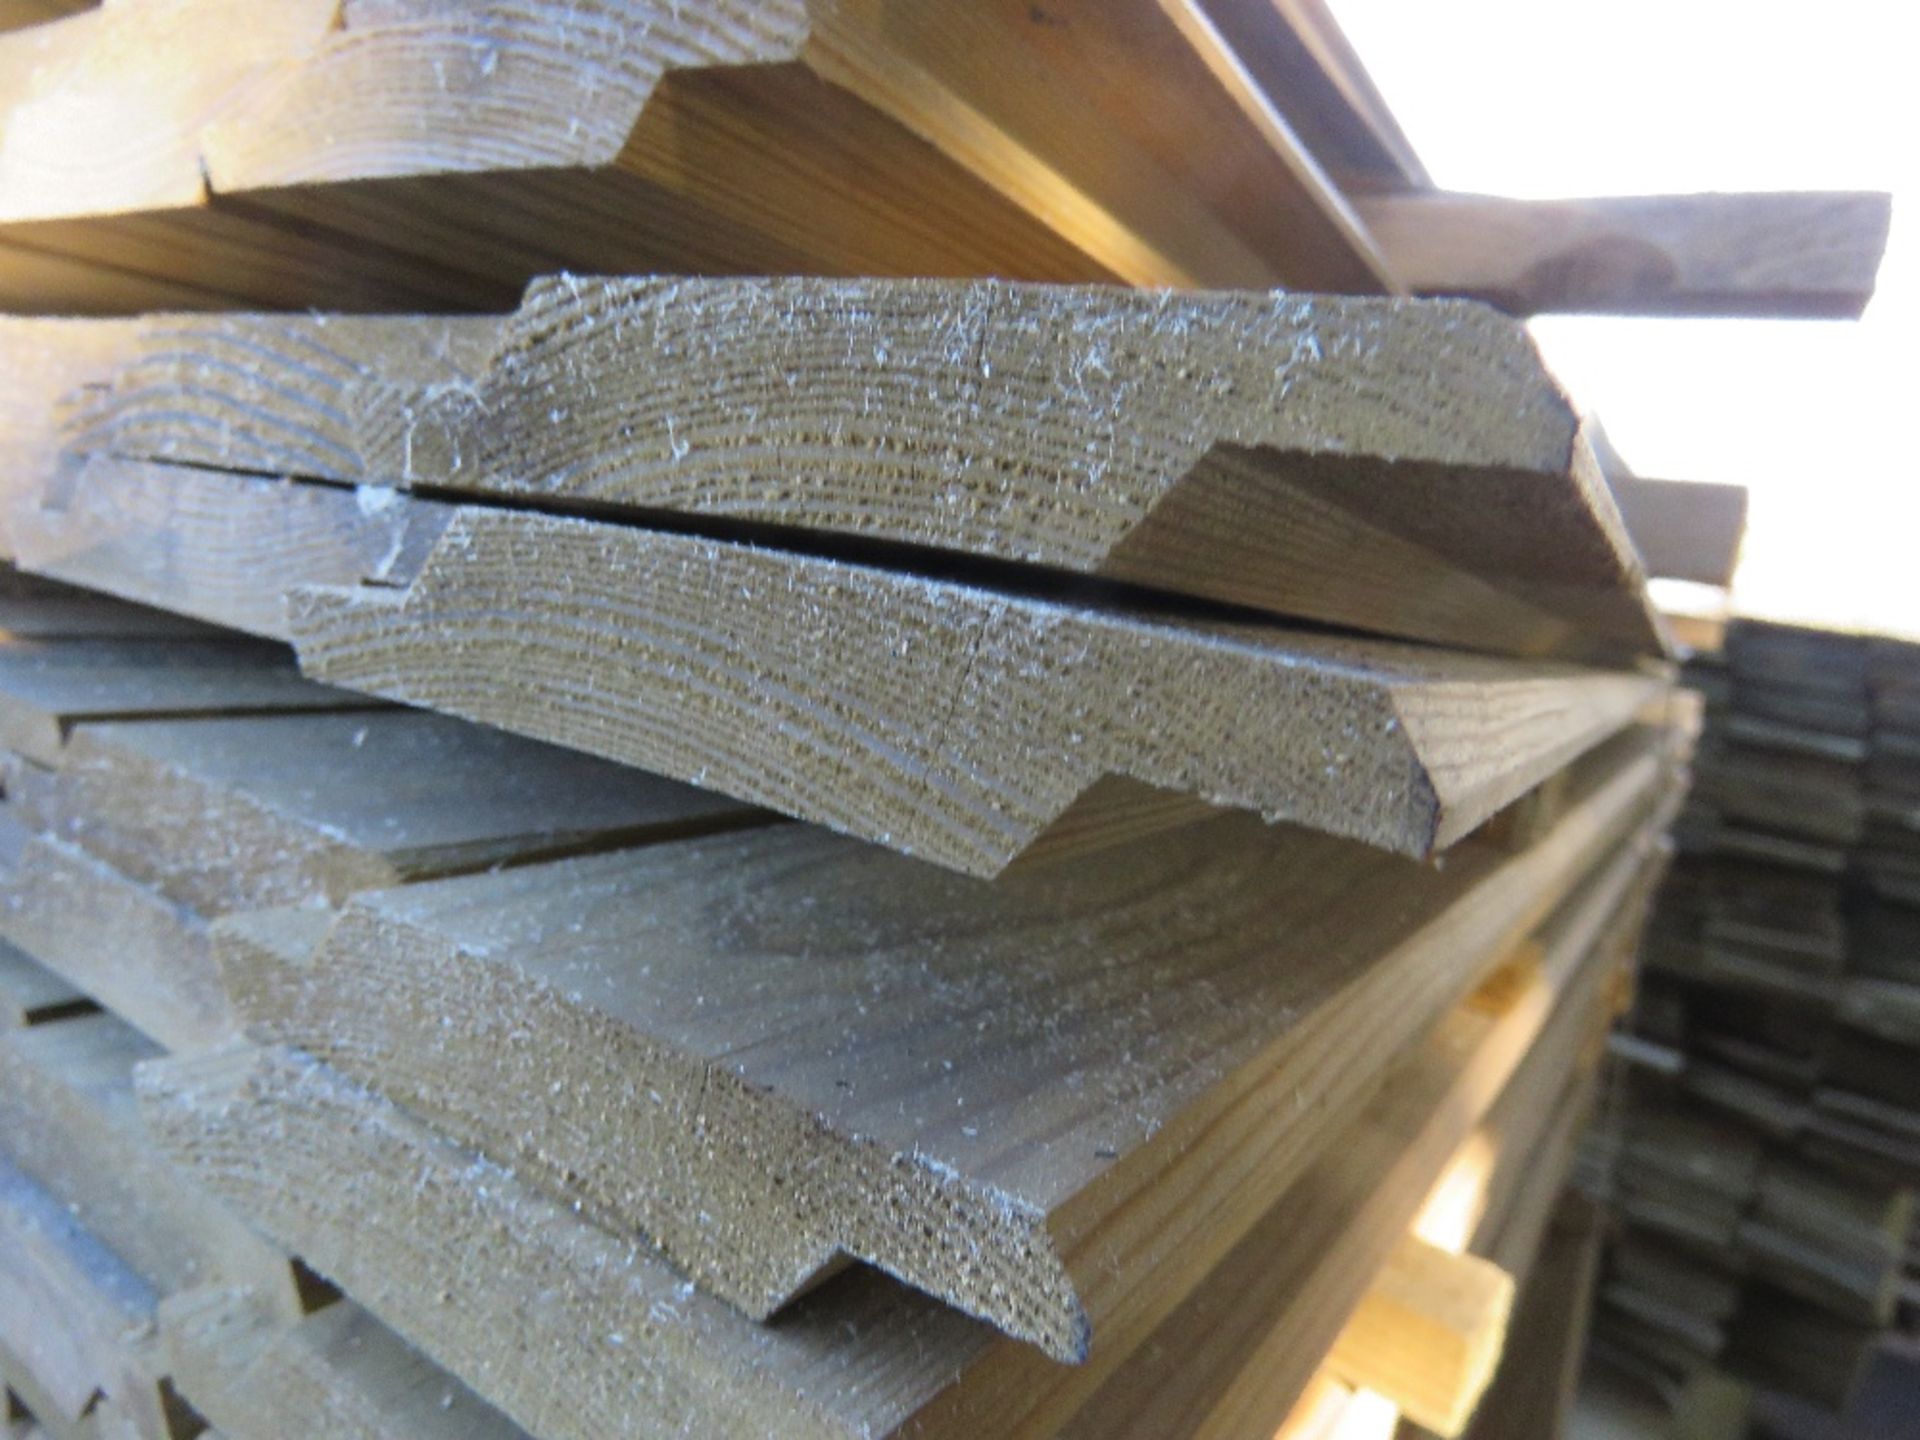 2 X PALLETS OF SHIPLAP PRESSURE TREATED FENCE CLADDING TIMBER BOARDS. 1.M-1.05M LENGTH X 95MM WIDTH - Image 4 of 4